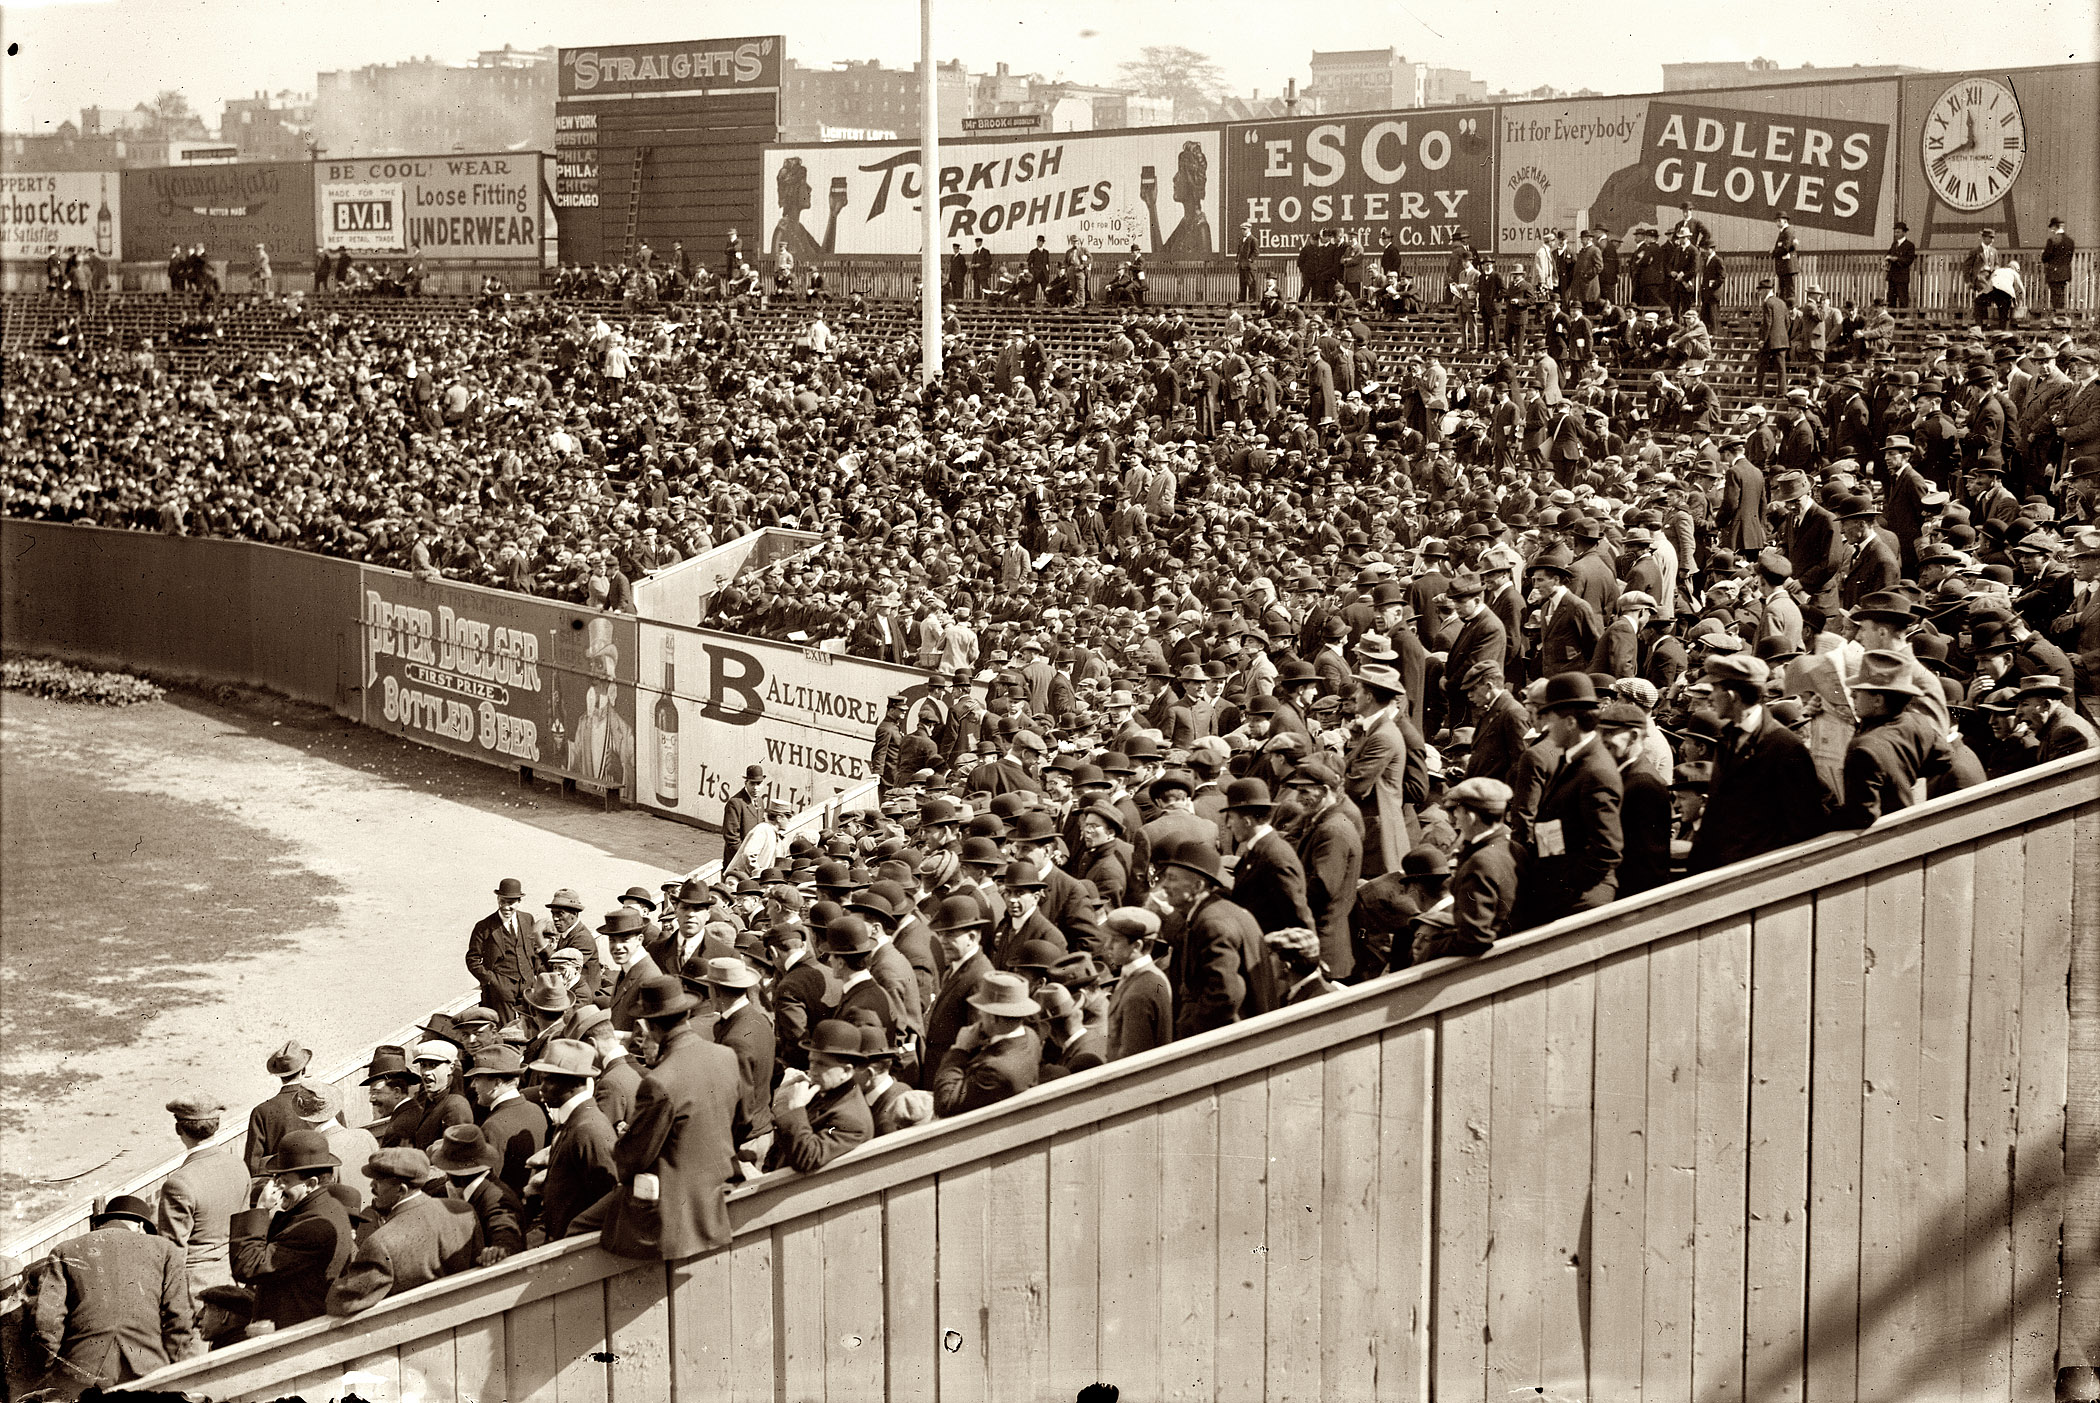 October 8, 1912. First game of the 1912 World Series, between the New York Giants and Boston Red Sox. Right field grandstand at New York's Polo Grounds. 5x7 glass negative, George Grantham Bain Collection. View full size.